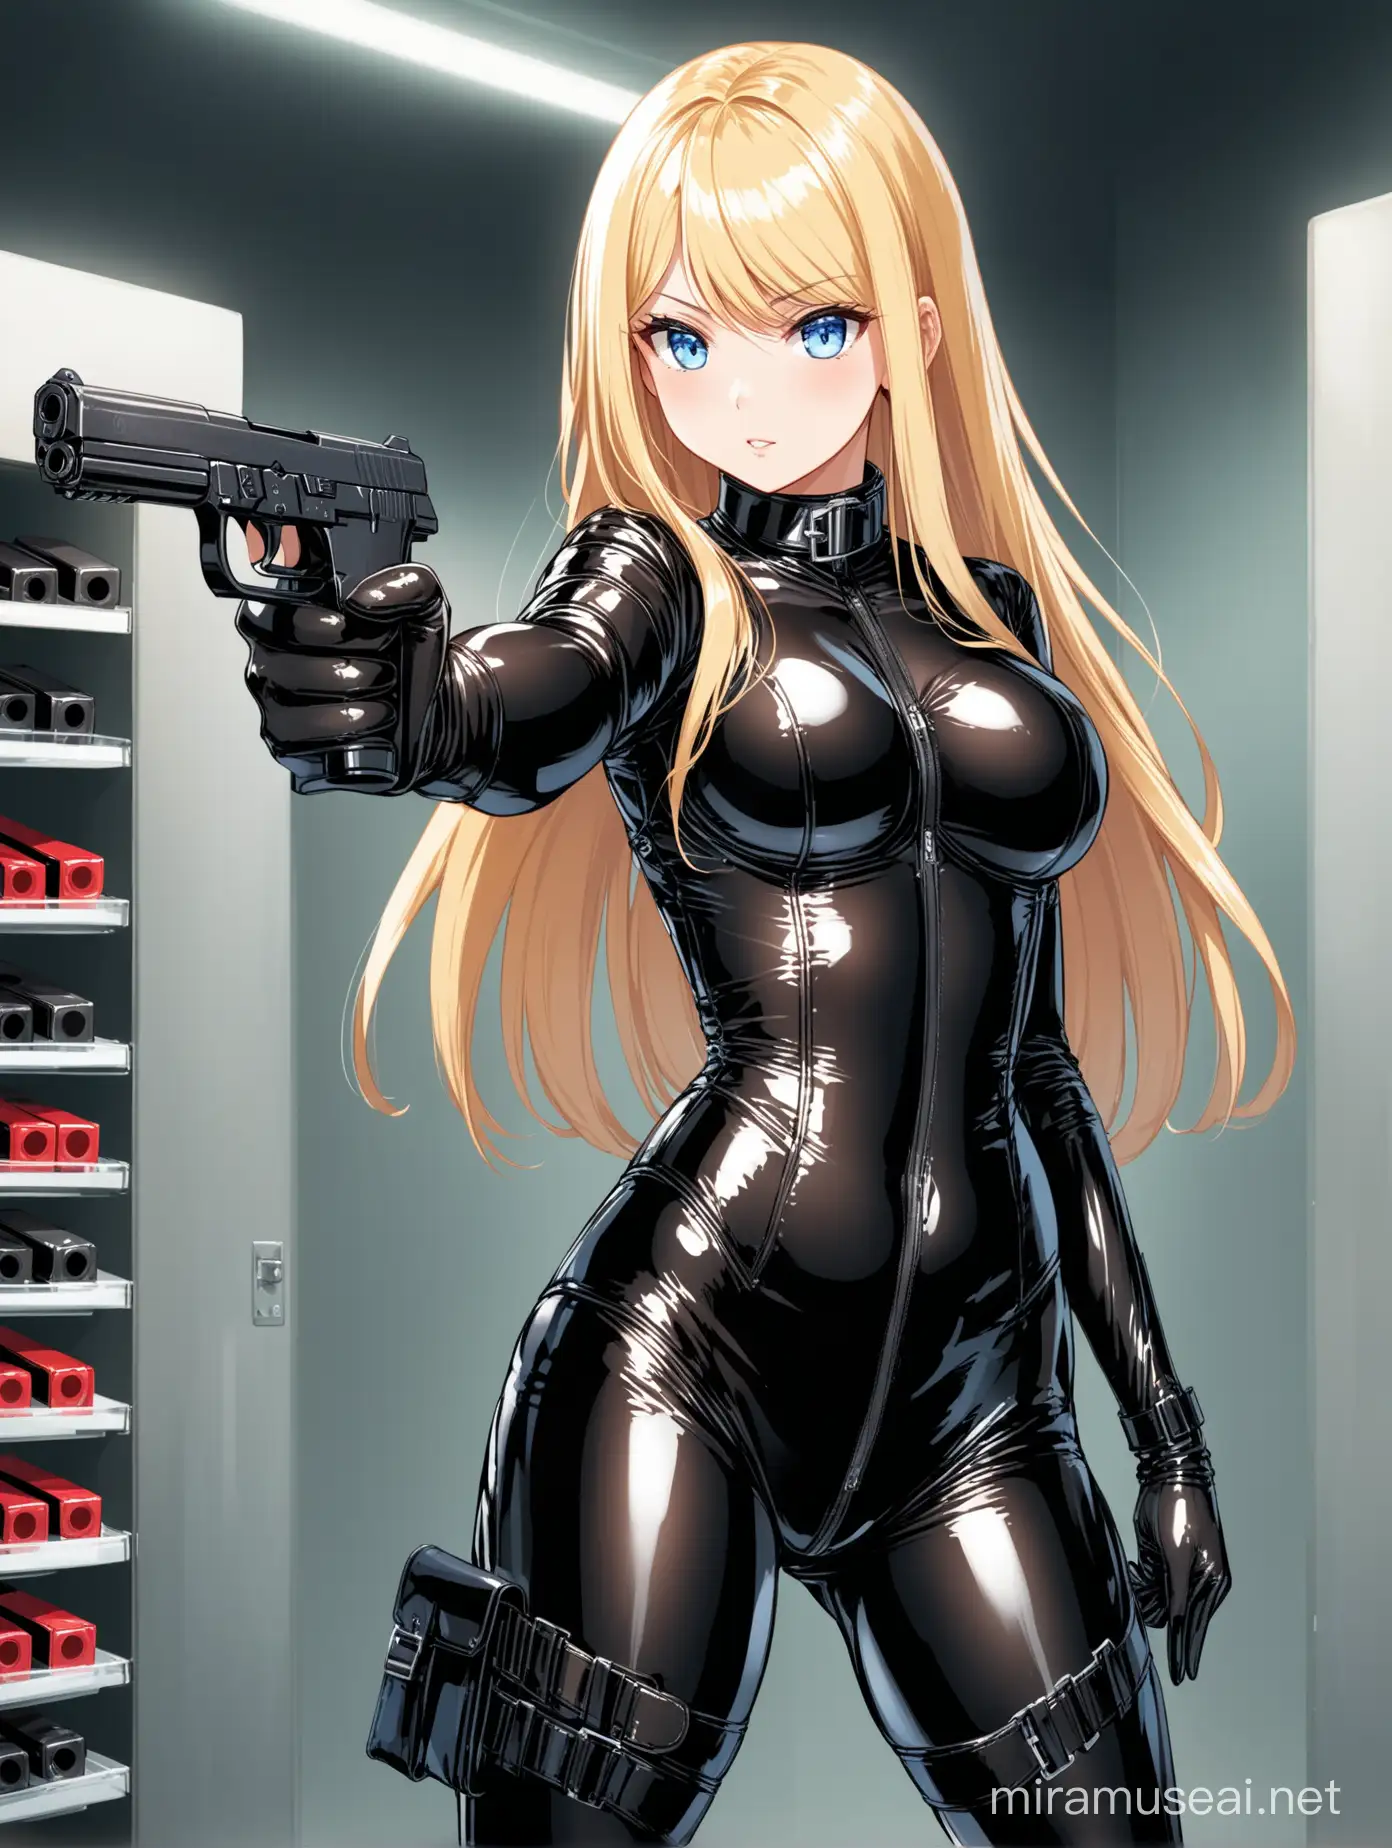 Blond Assassin in Glossy Black Catsuit Aiming Uzi 9mm in Convenience Store